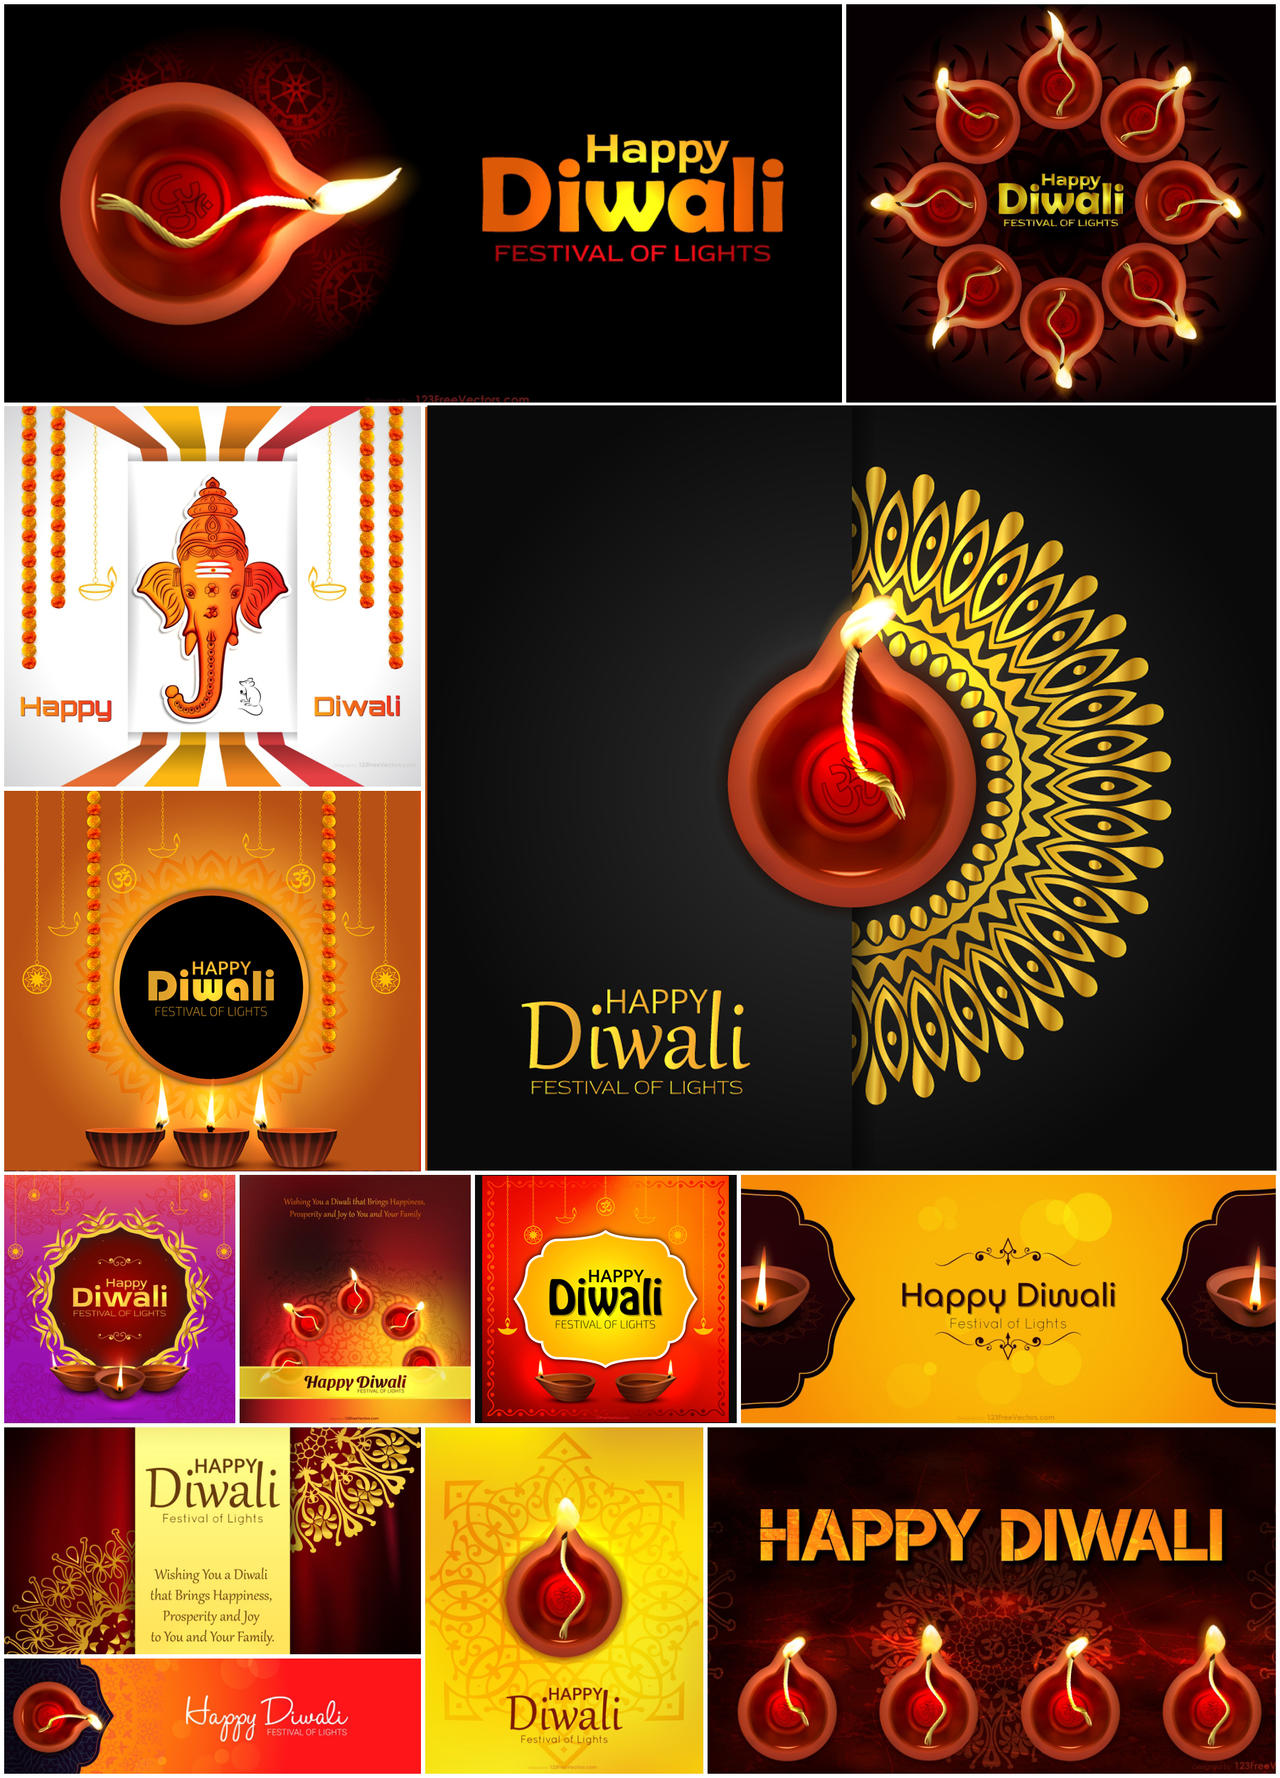 Free Happy Diwali Background Images by 123freevectors on DeviantArt